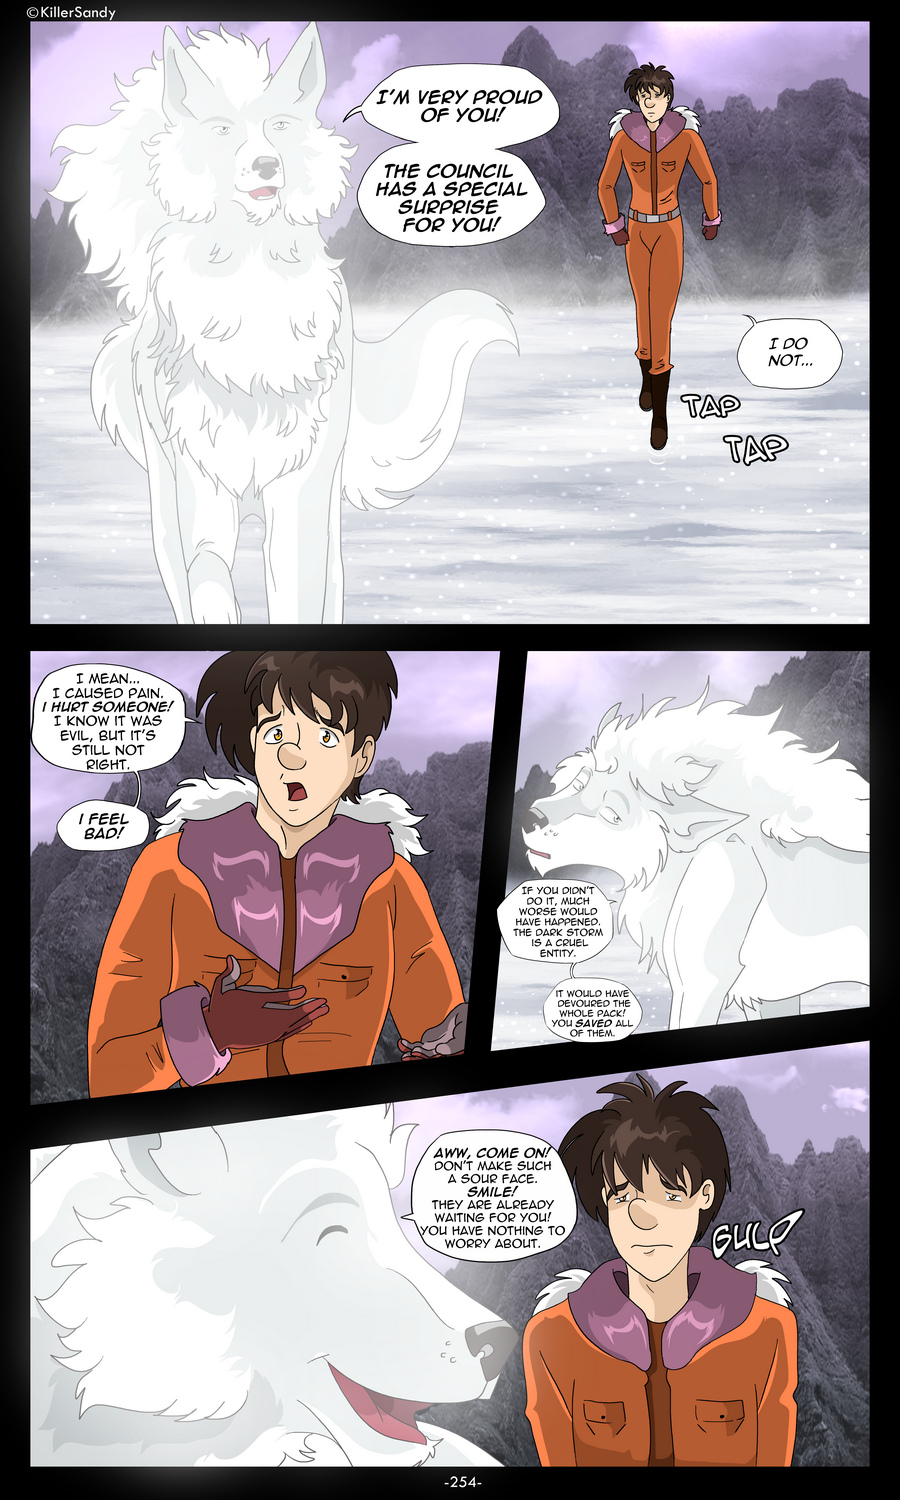 The Prince of the Moonlight Stone page 254